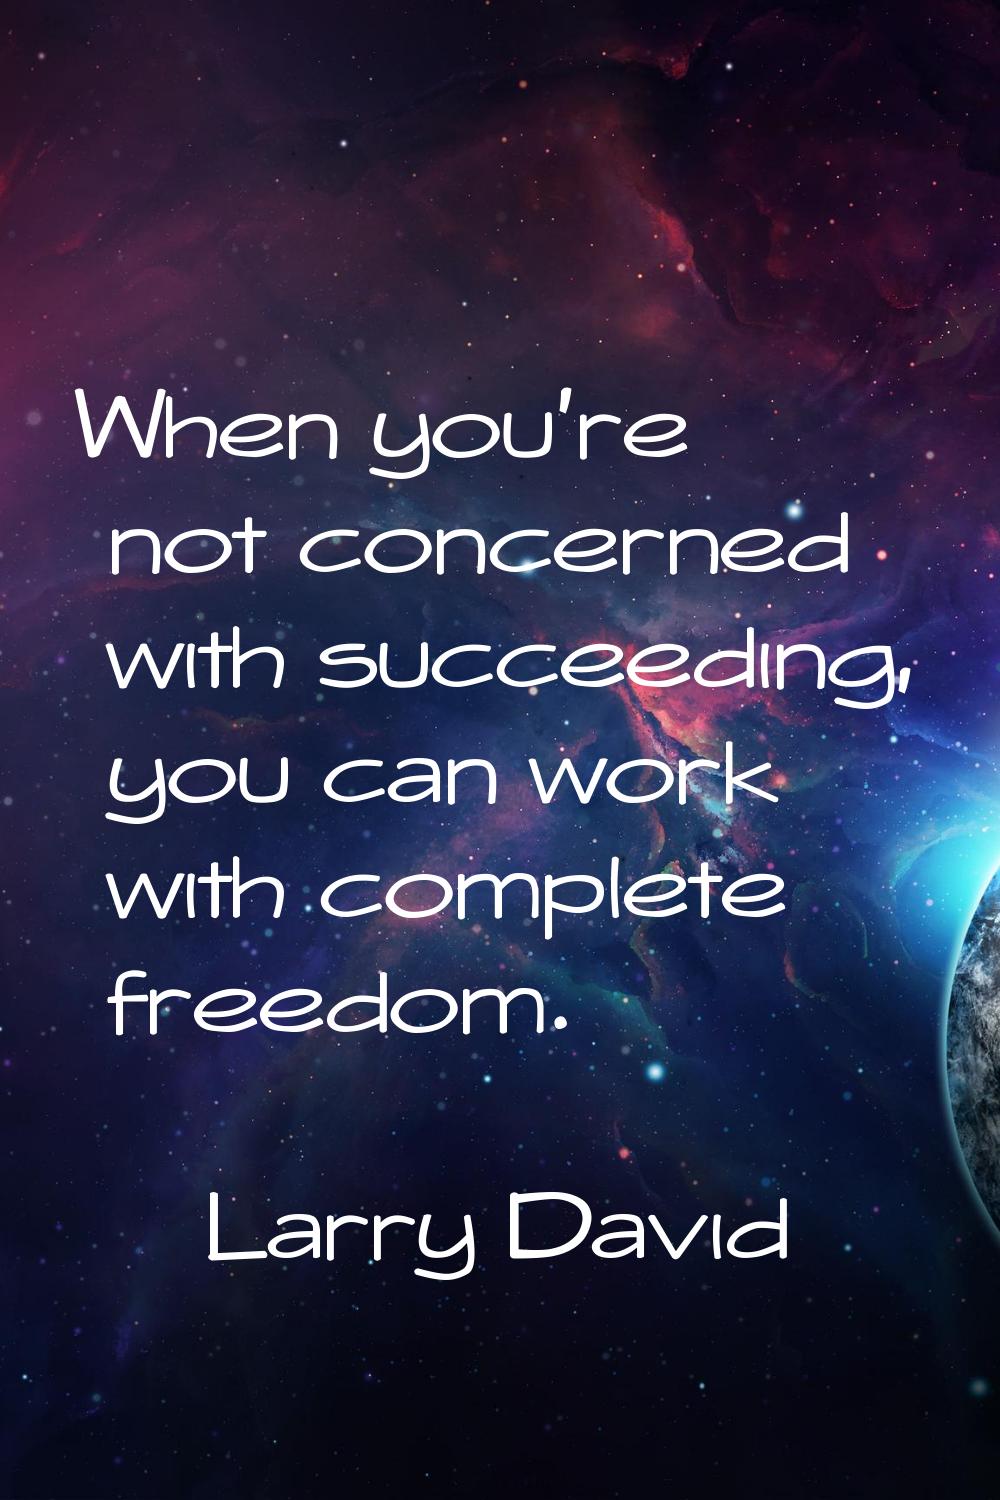 When you're not concerned with succeeding, you can work with complete freedom.